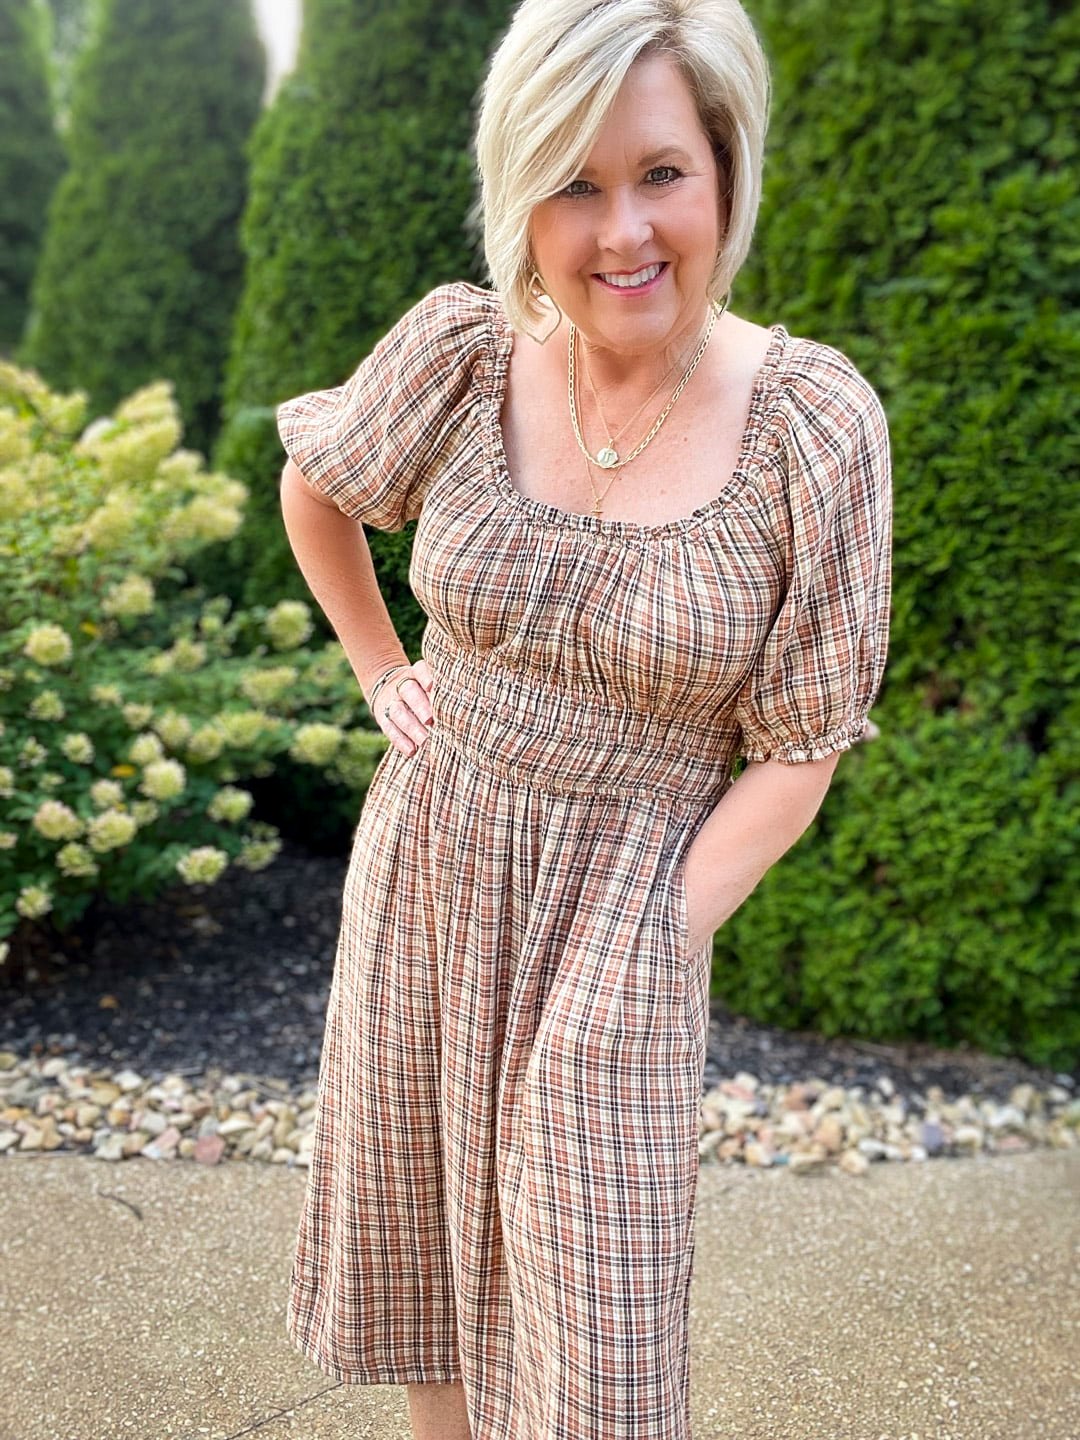 Over 40 Fashion Blogger, Tania Stephens is styling Old Navy Fall Dresses with western boots22